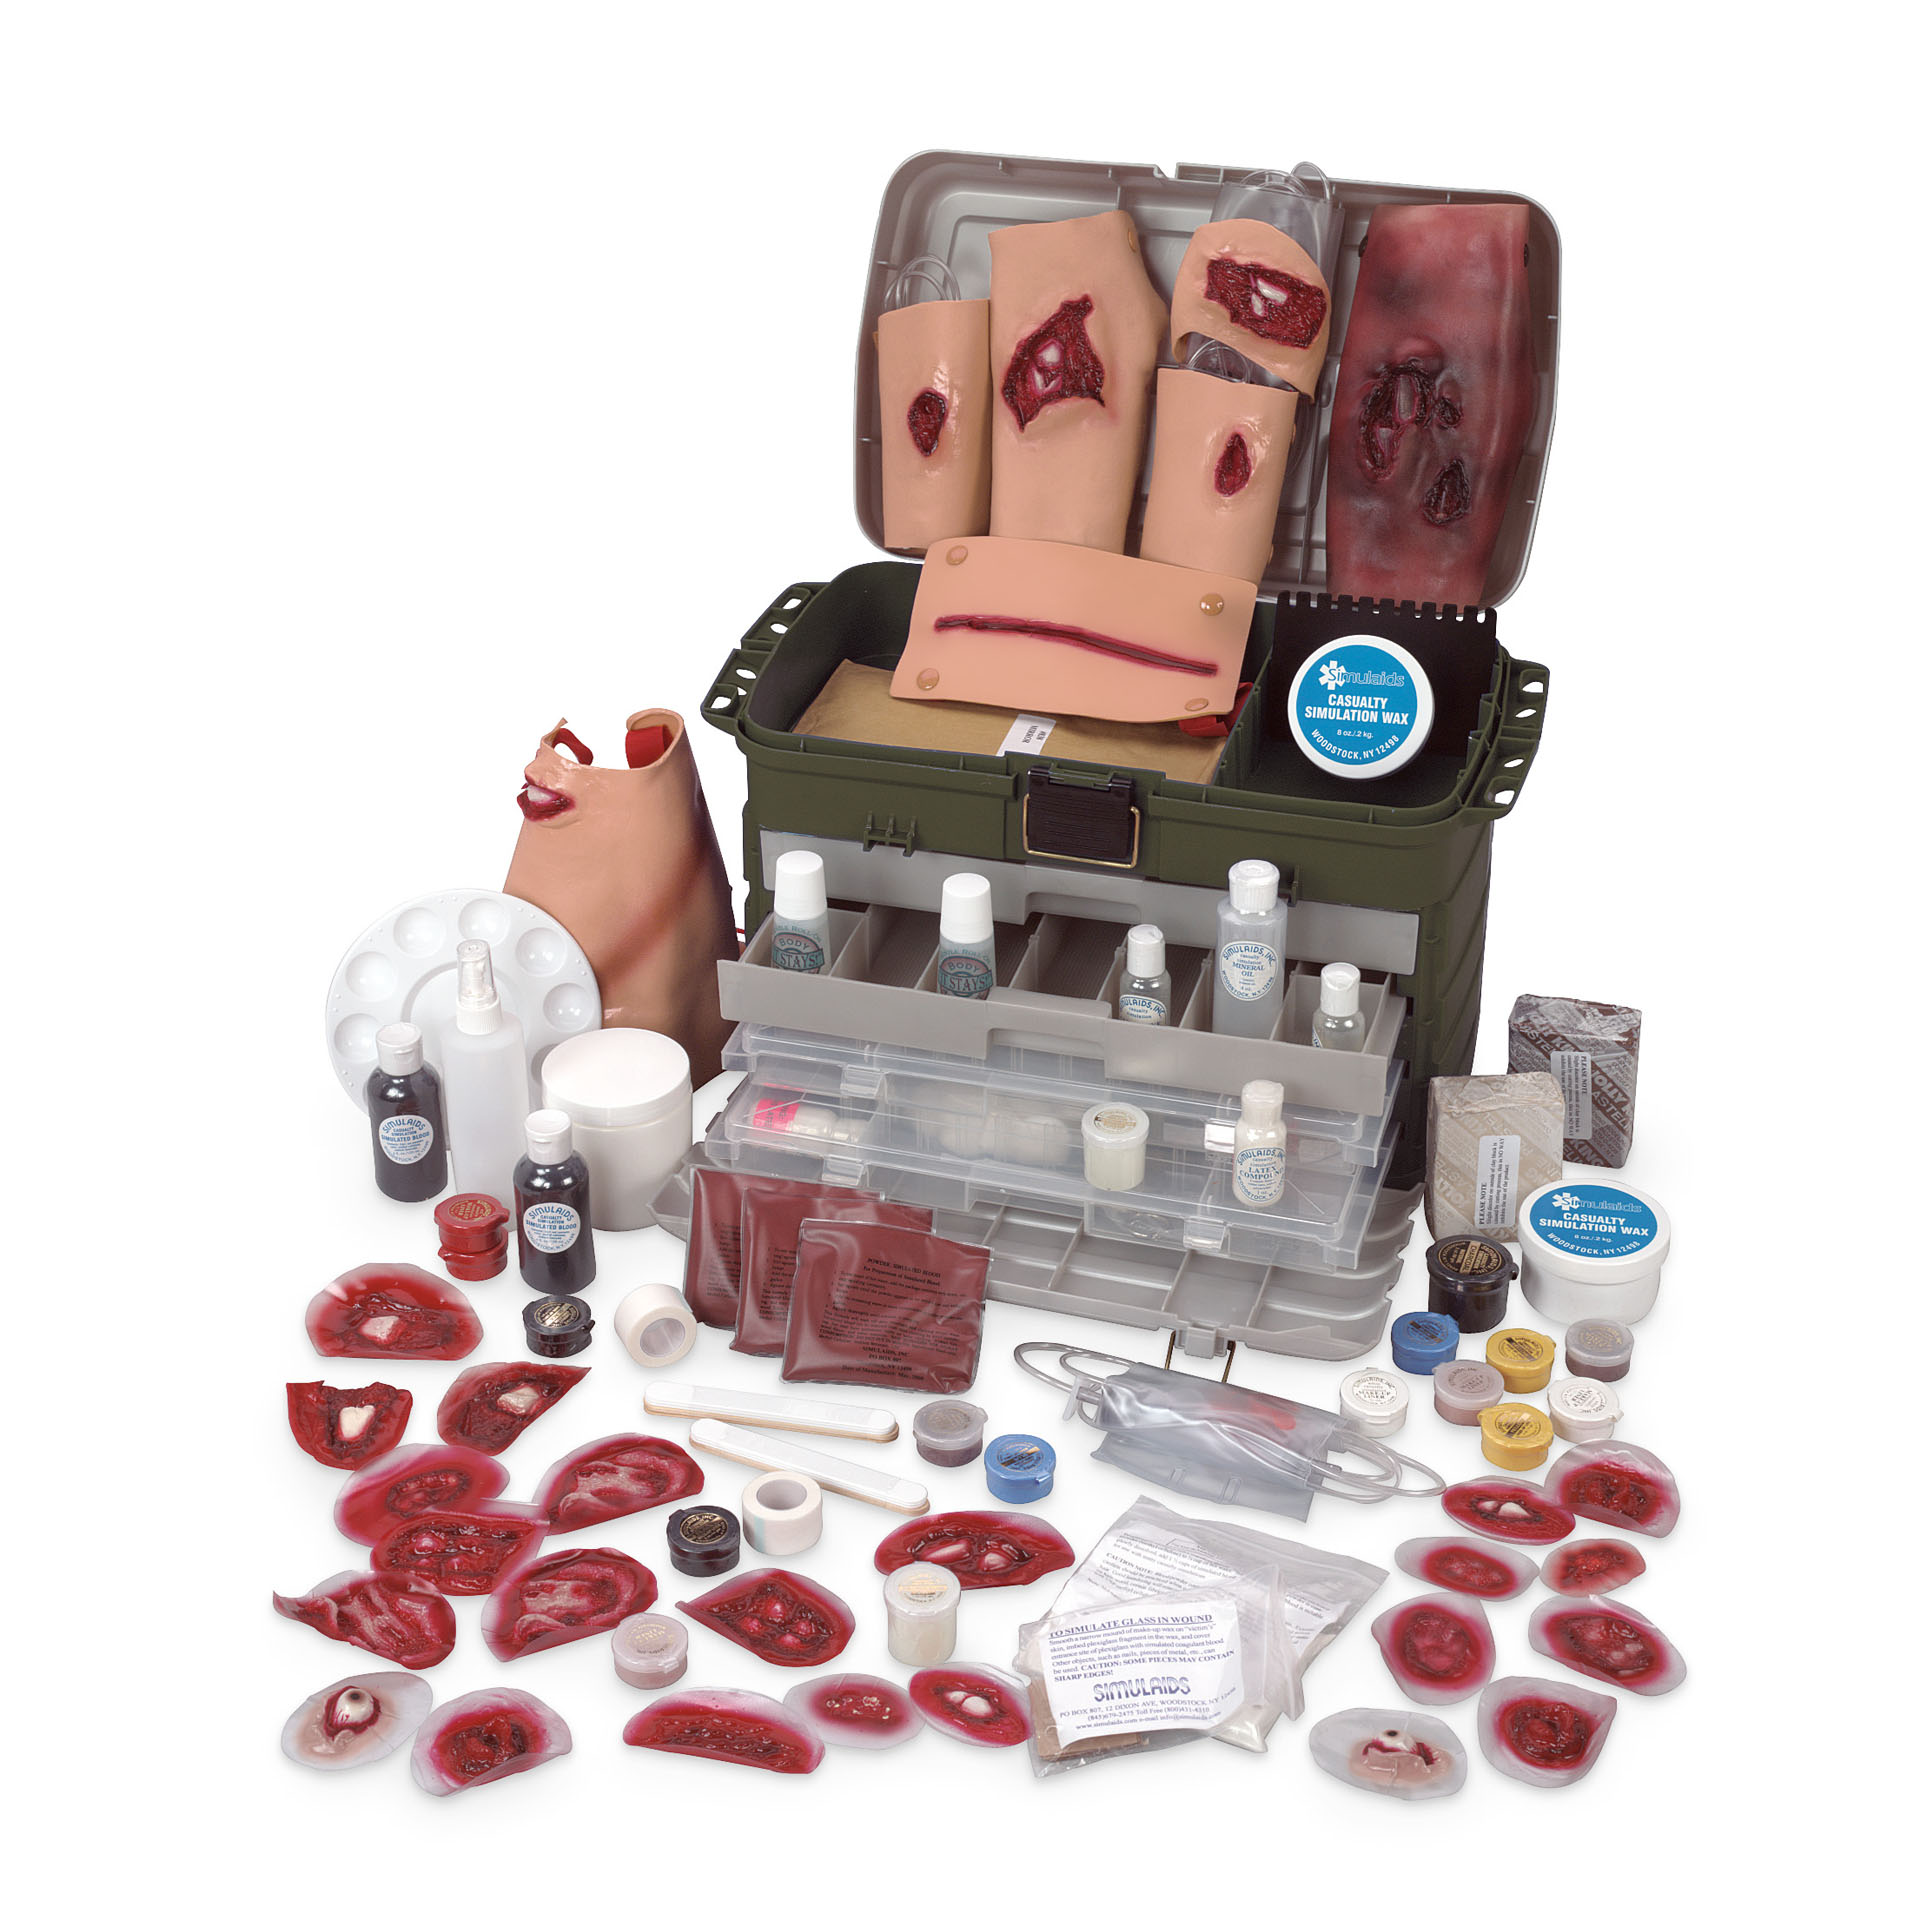 Deluxe Casualty Simulation Kit